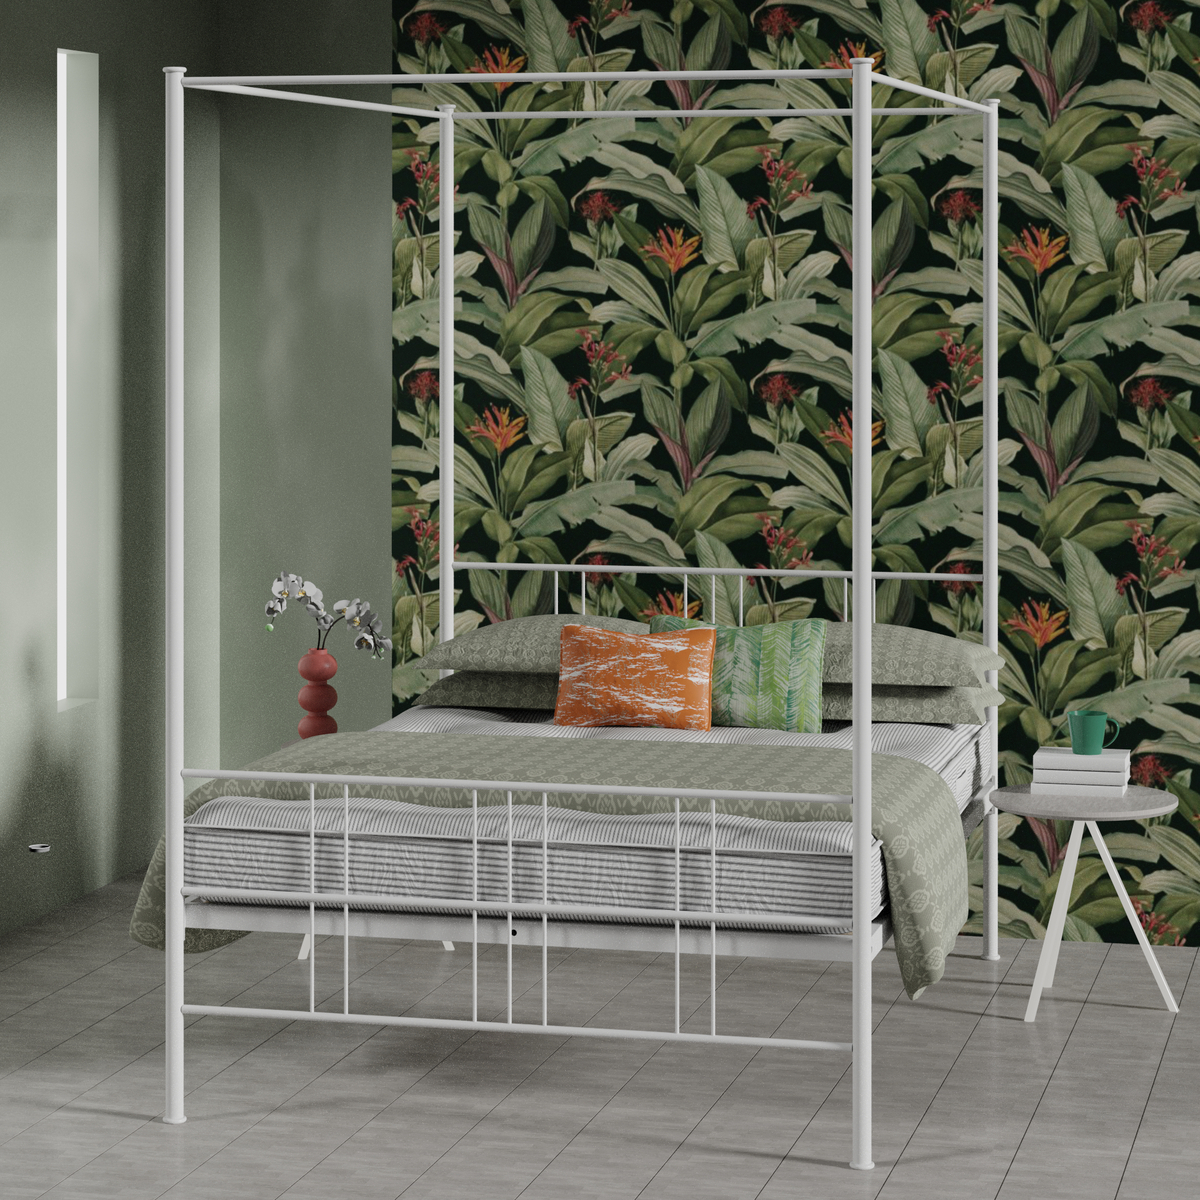 white four poster bed in with a jungle mural background